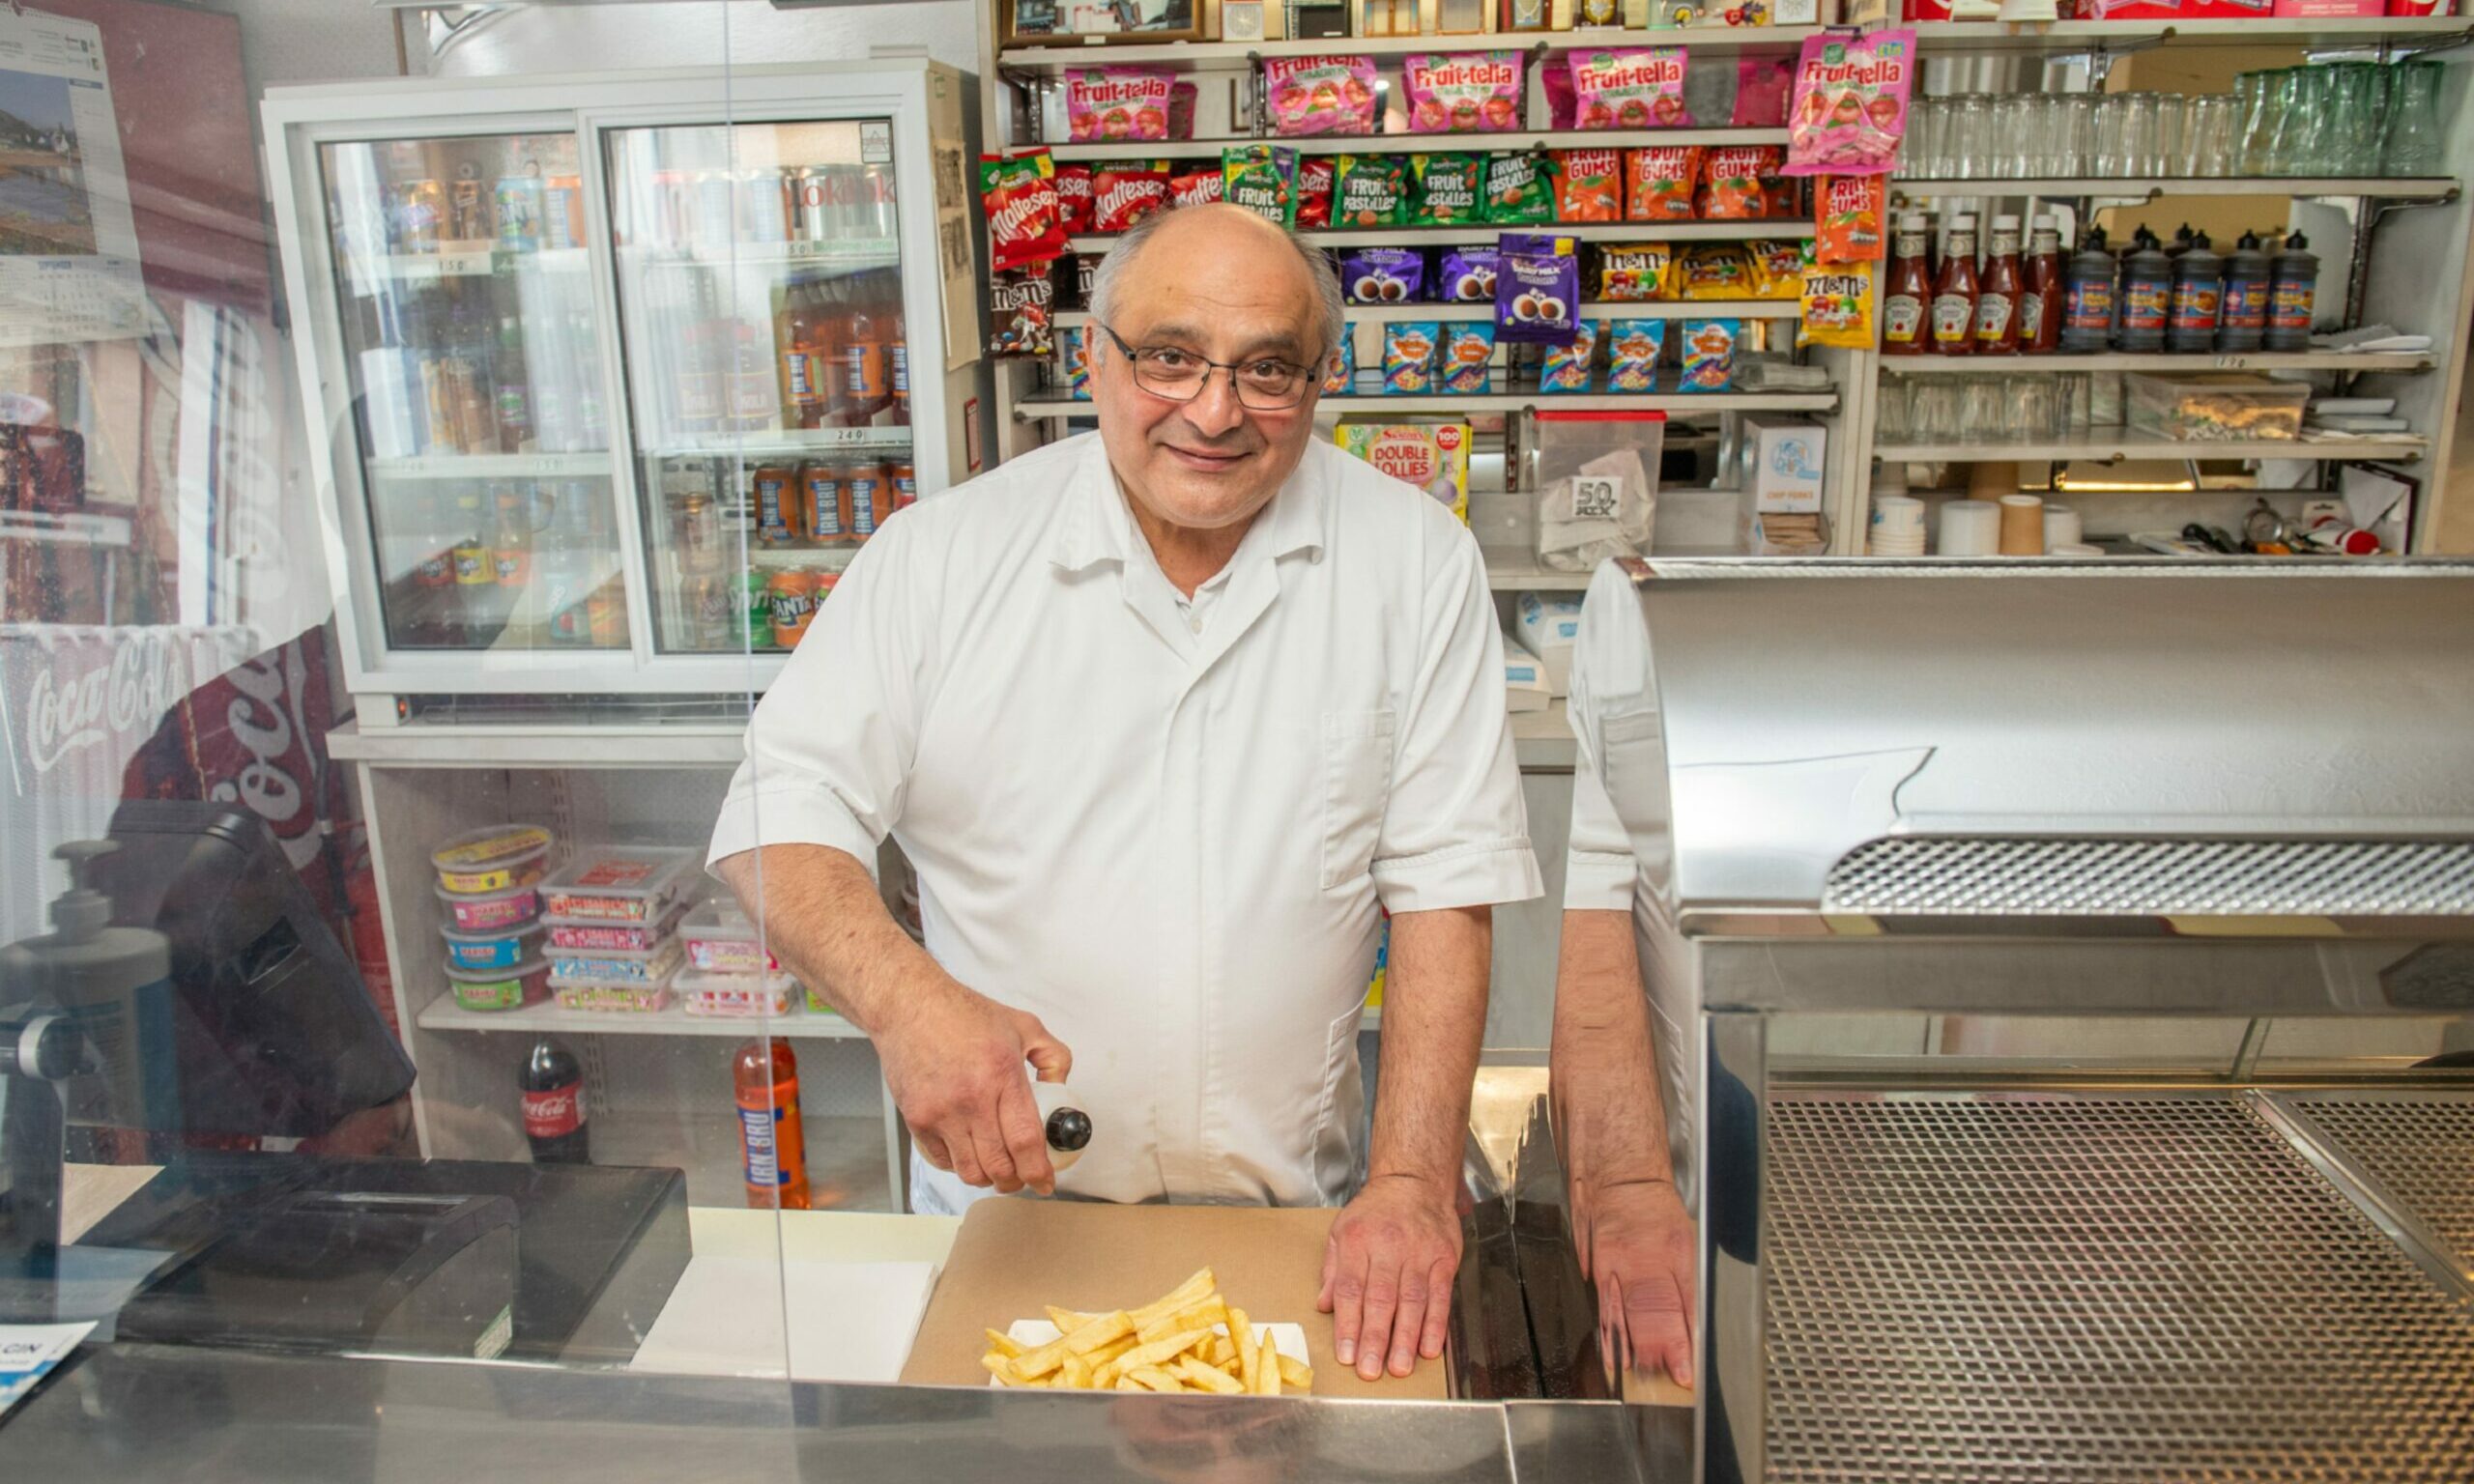 Michael Miele putting salt and vinegar on chips behind the counter at the Northern Fish Restaurant. 